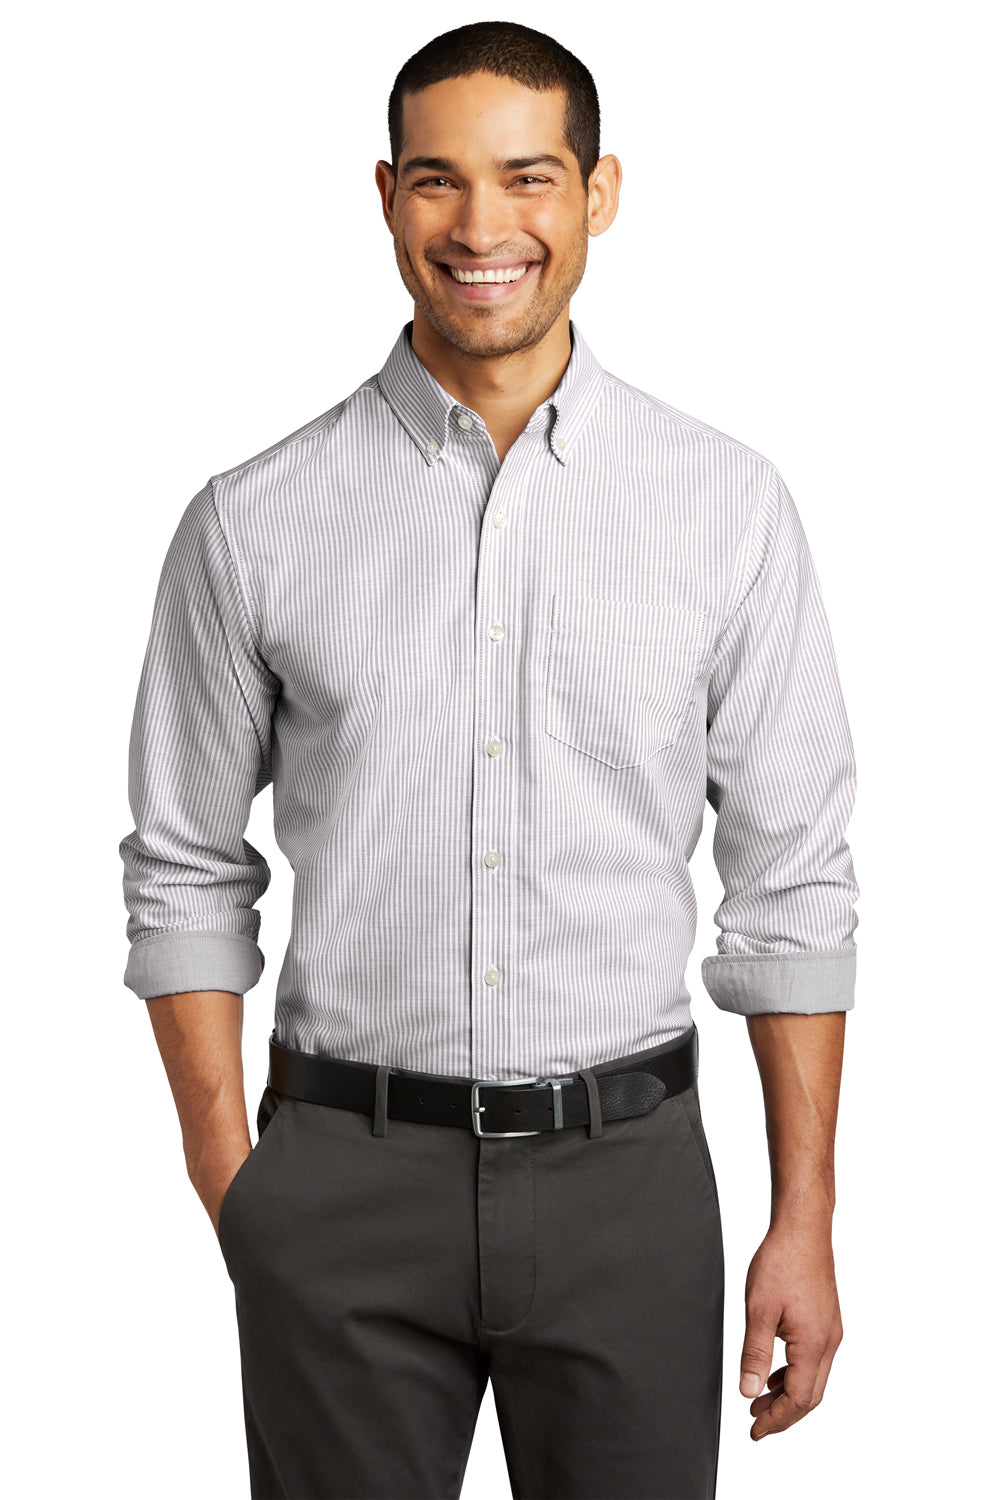 Port Authority Mens SuperPro Long Sleeve Button Down Shirt w/ Pocket Gusty Grey/White Front